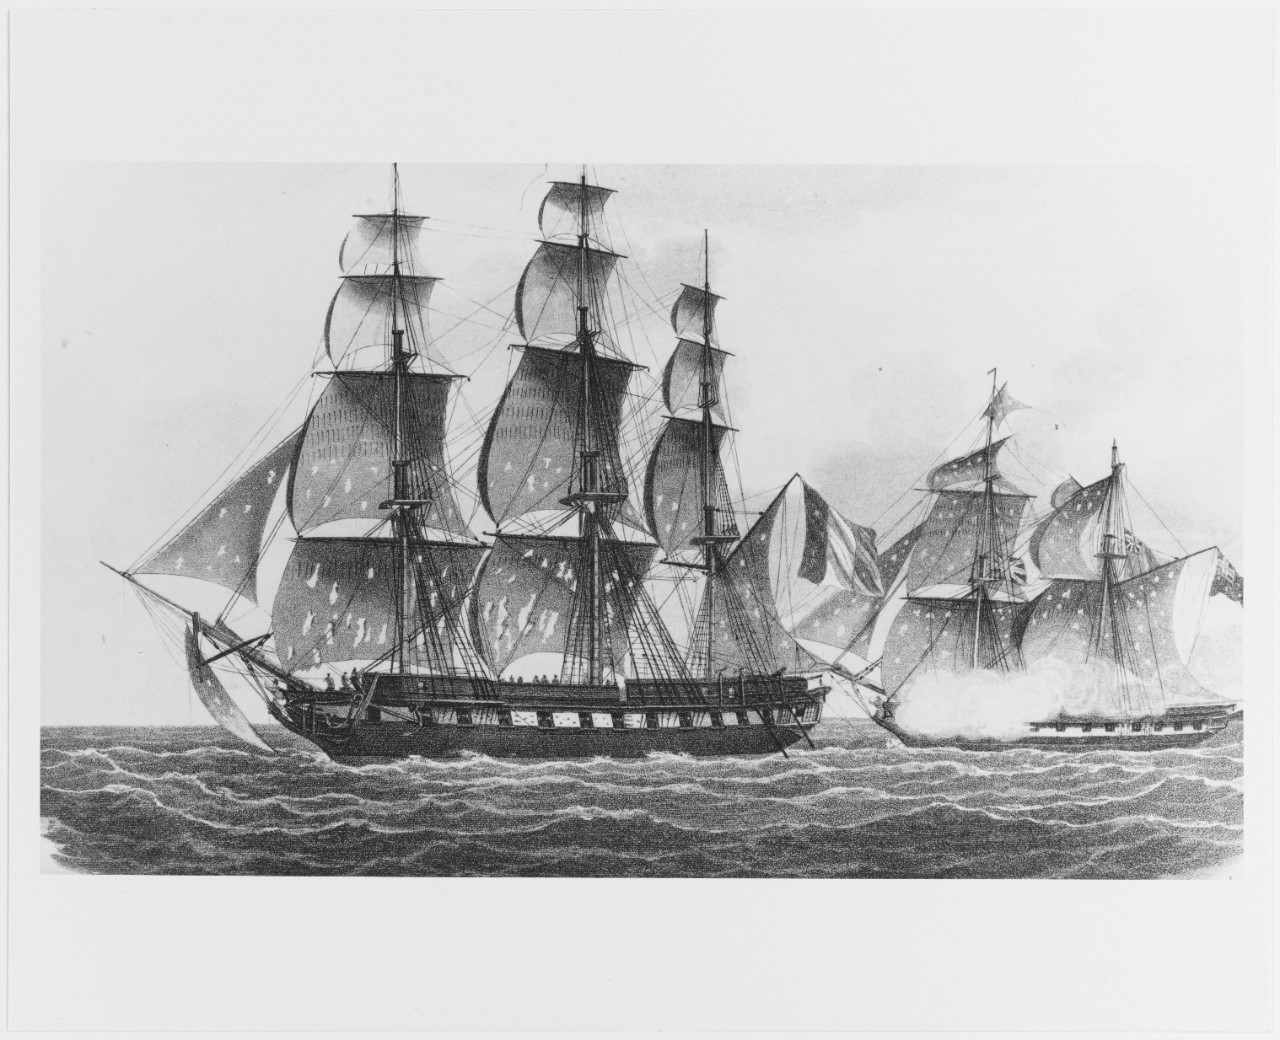 Action between H.M. Sloop PILOT and the French Warship LA LEGERE, June 17, 1815